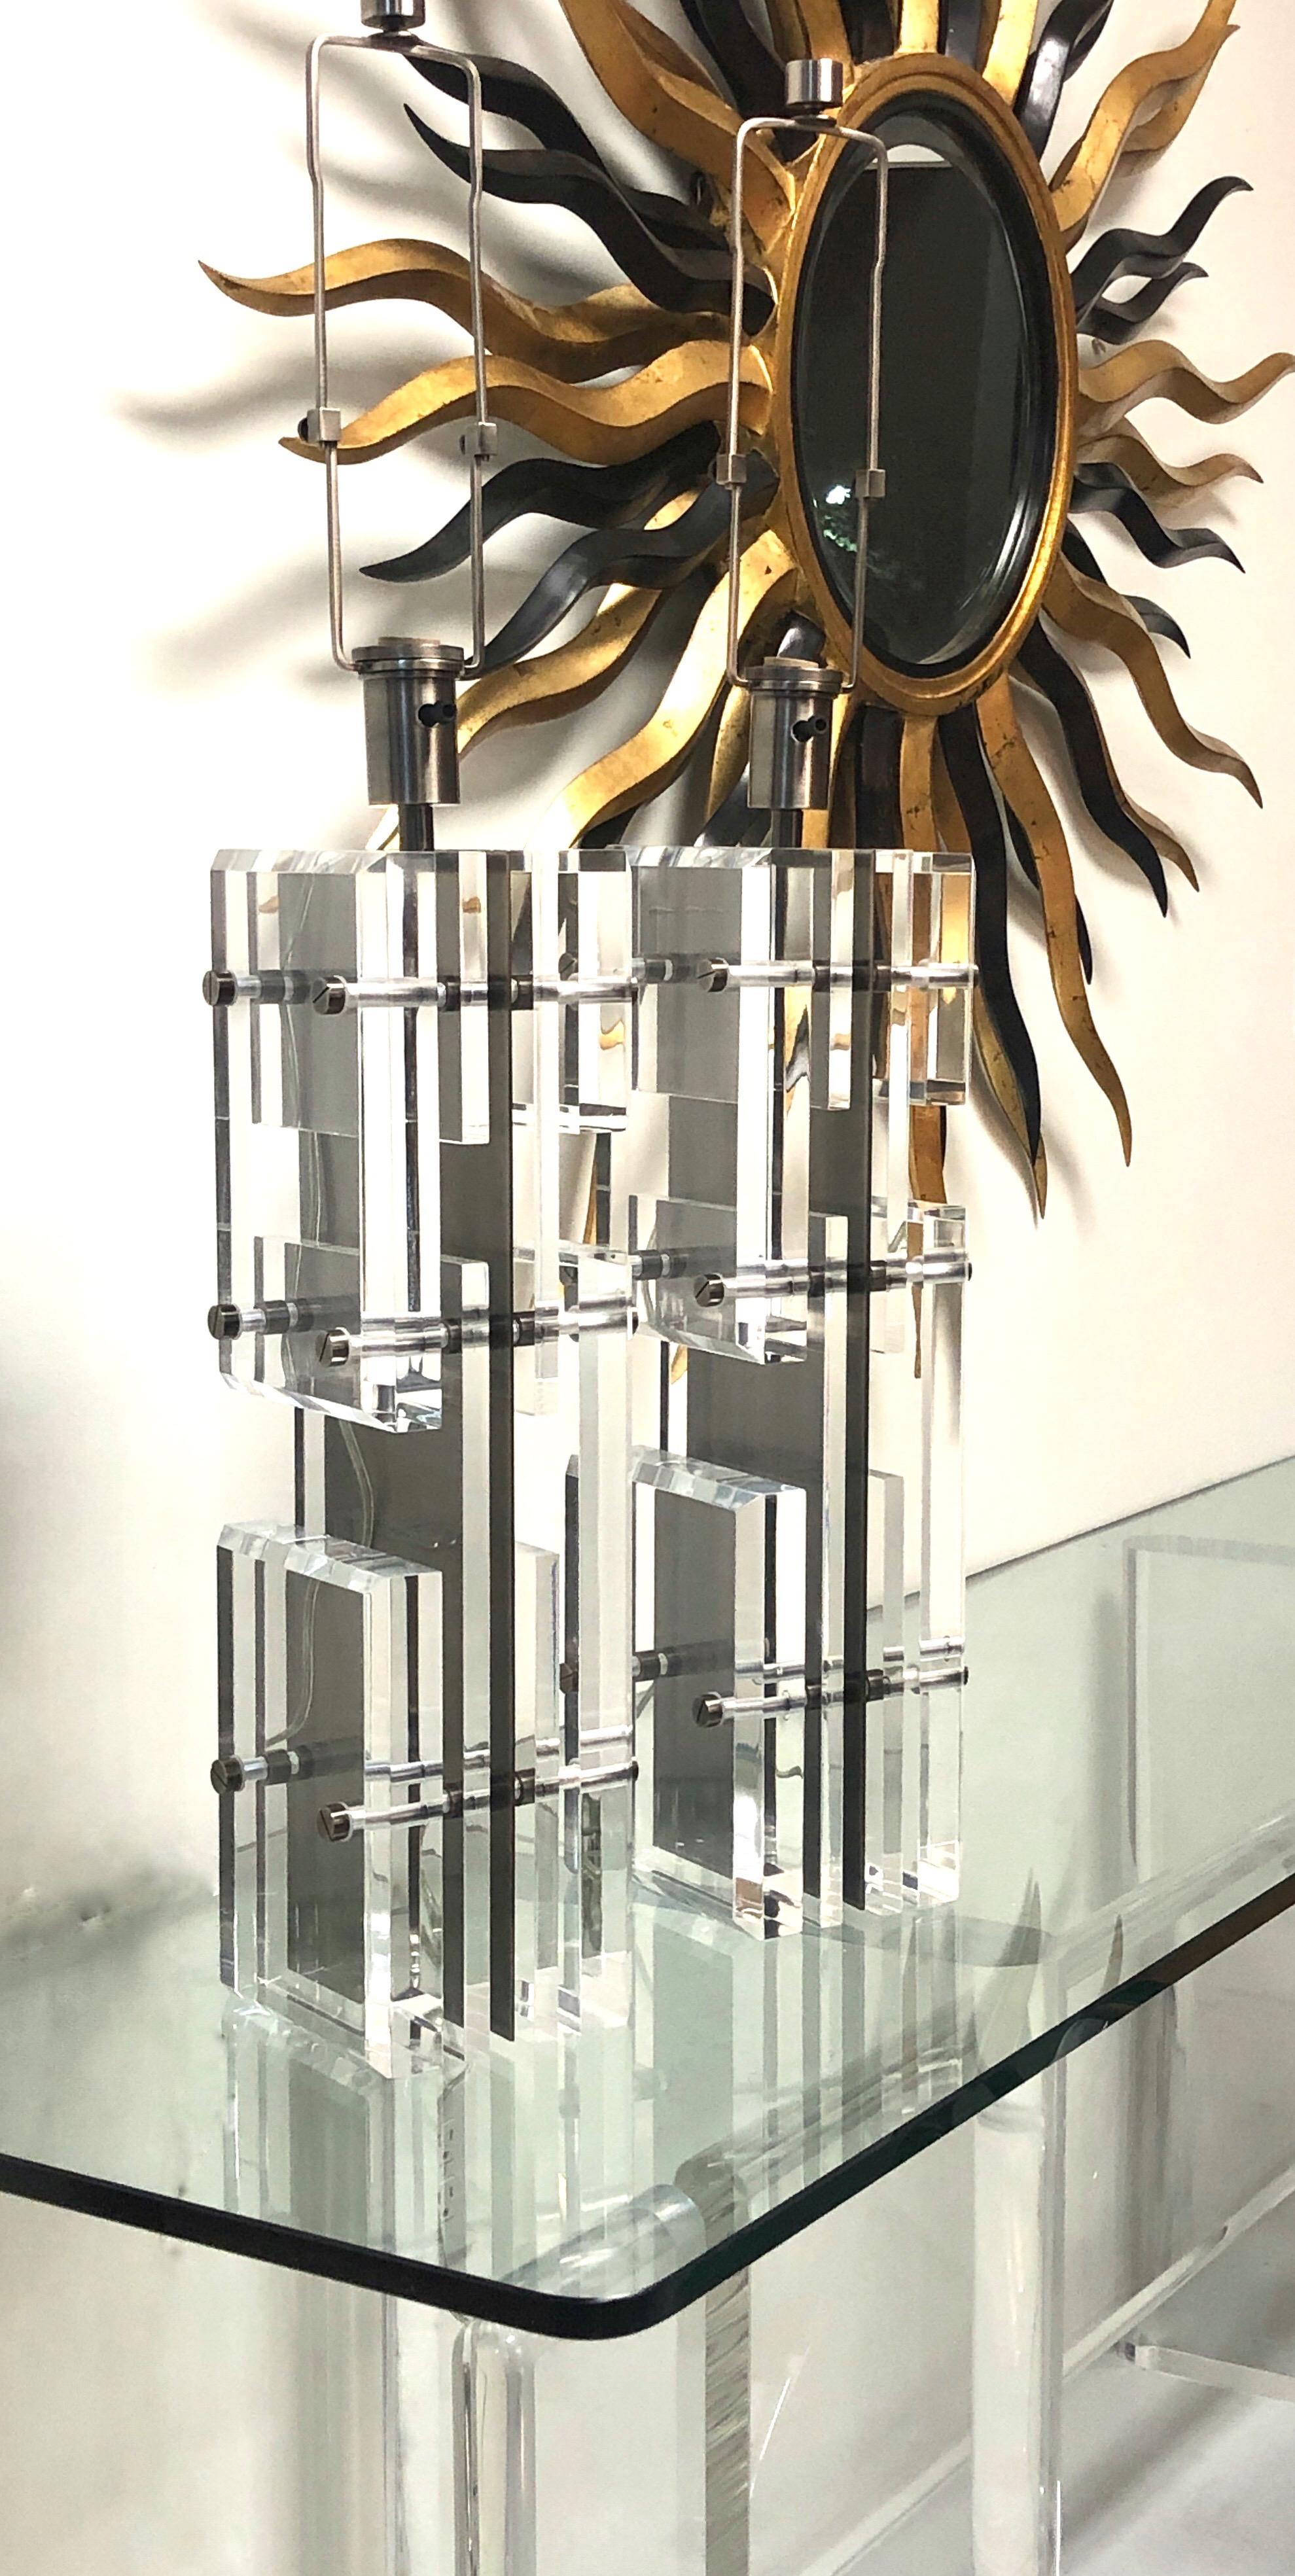 A pair of massive lamps. The body is comprised of multiple pieces of Lucite attached to a central metal piece by rods and custom screw finials. The Lucite pieces create an op art illusion with the brakes in the planes and the different sizes and